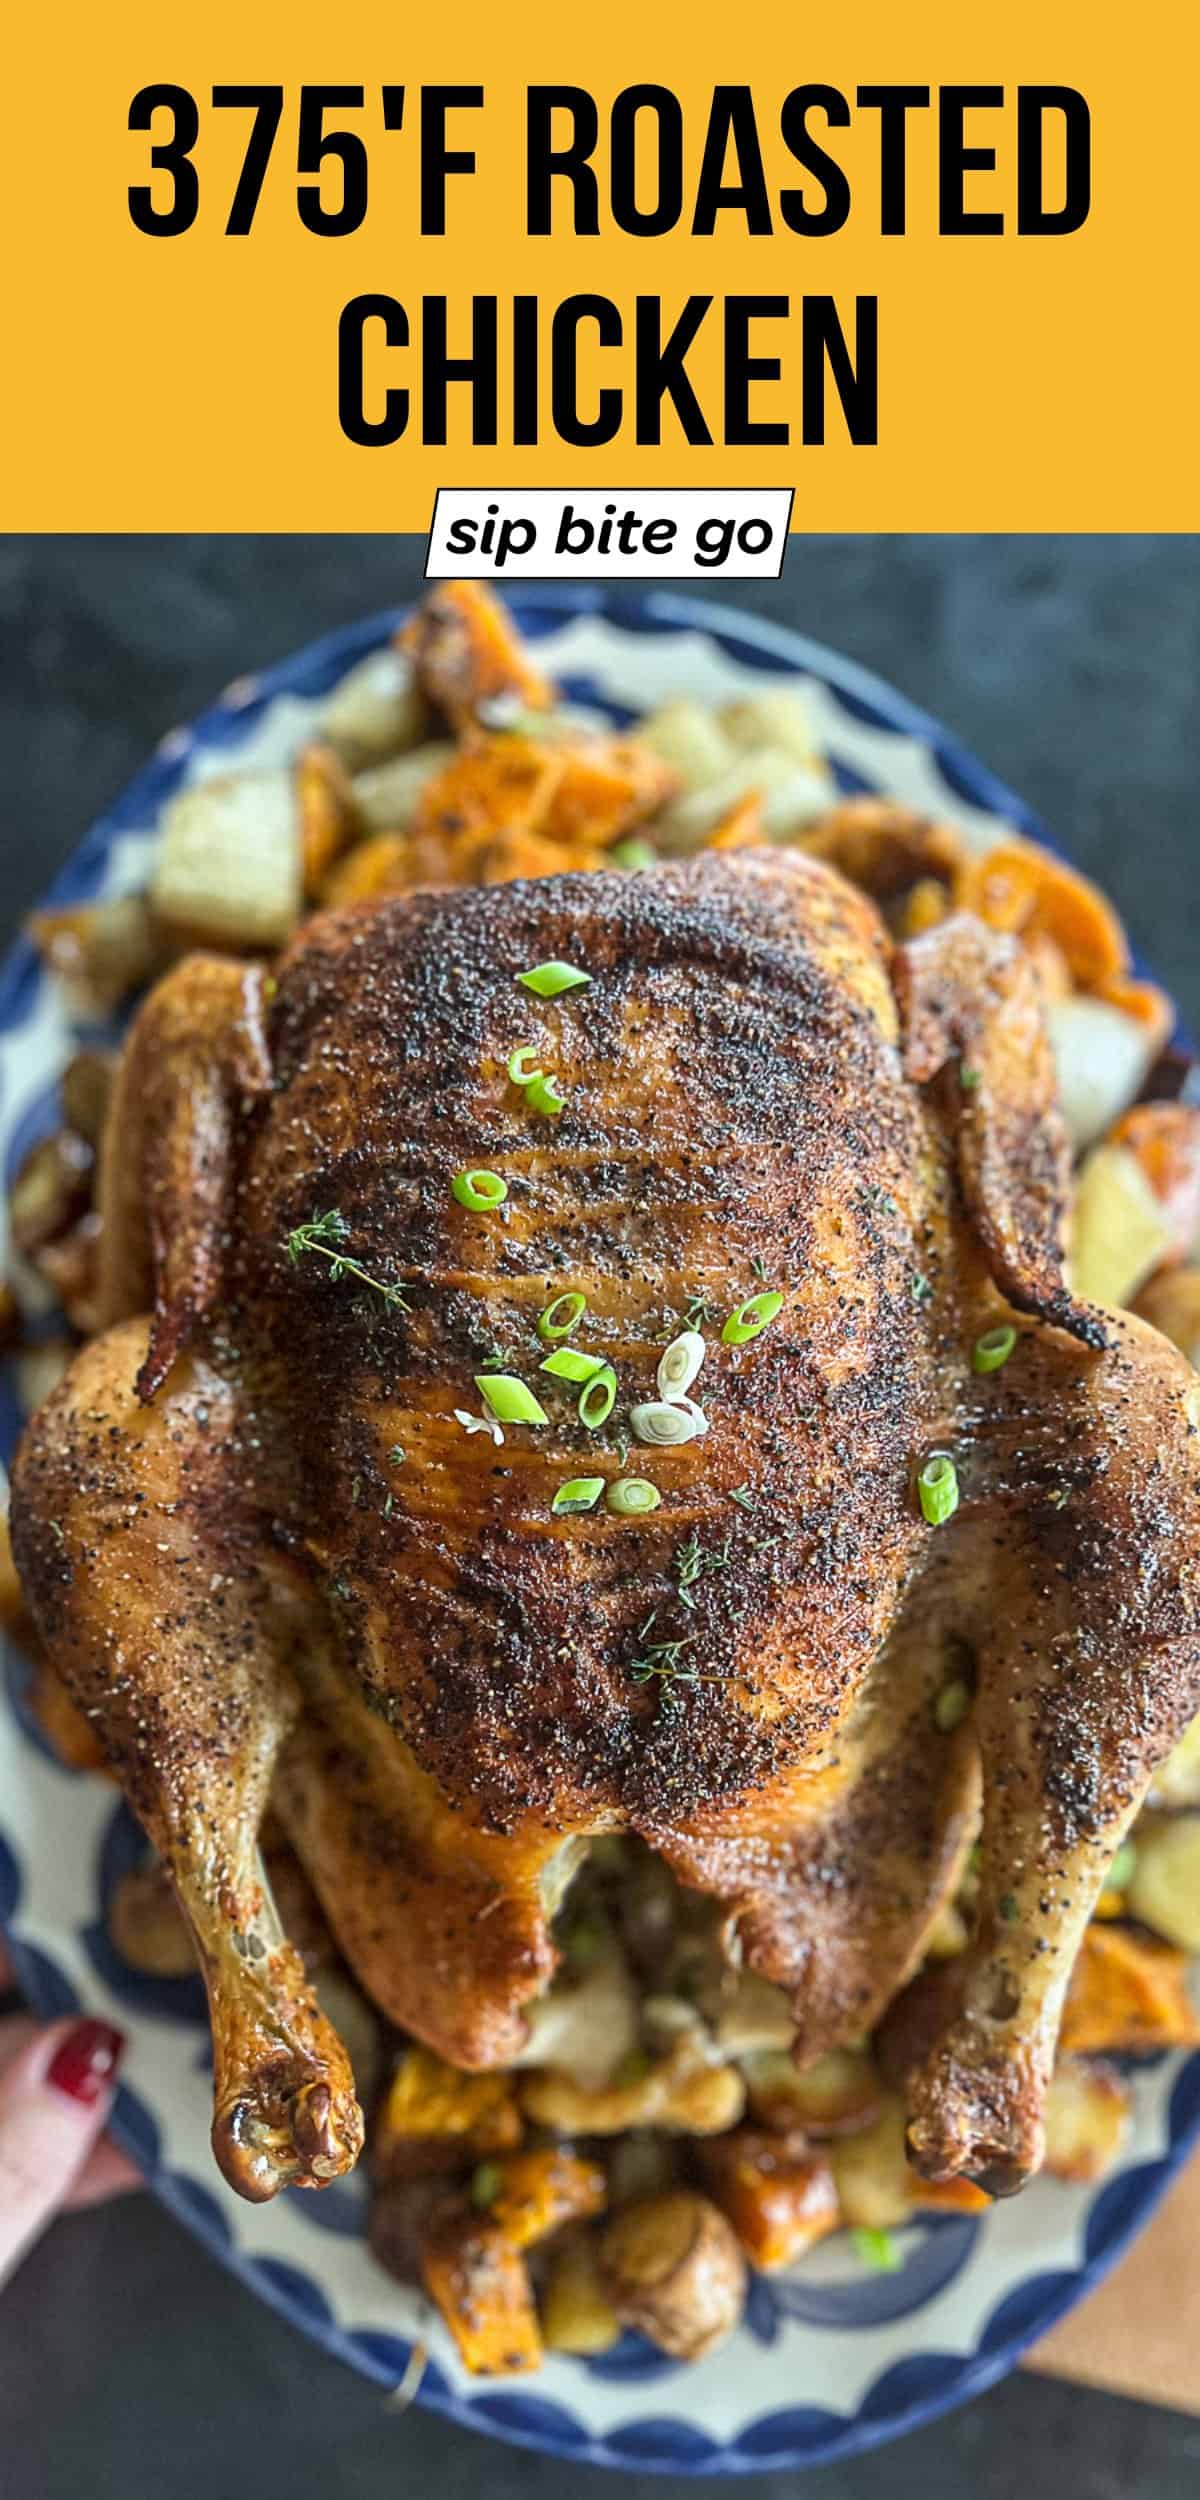 Roasted Whole Chicken at 375 with text overlay